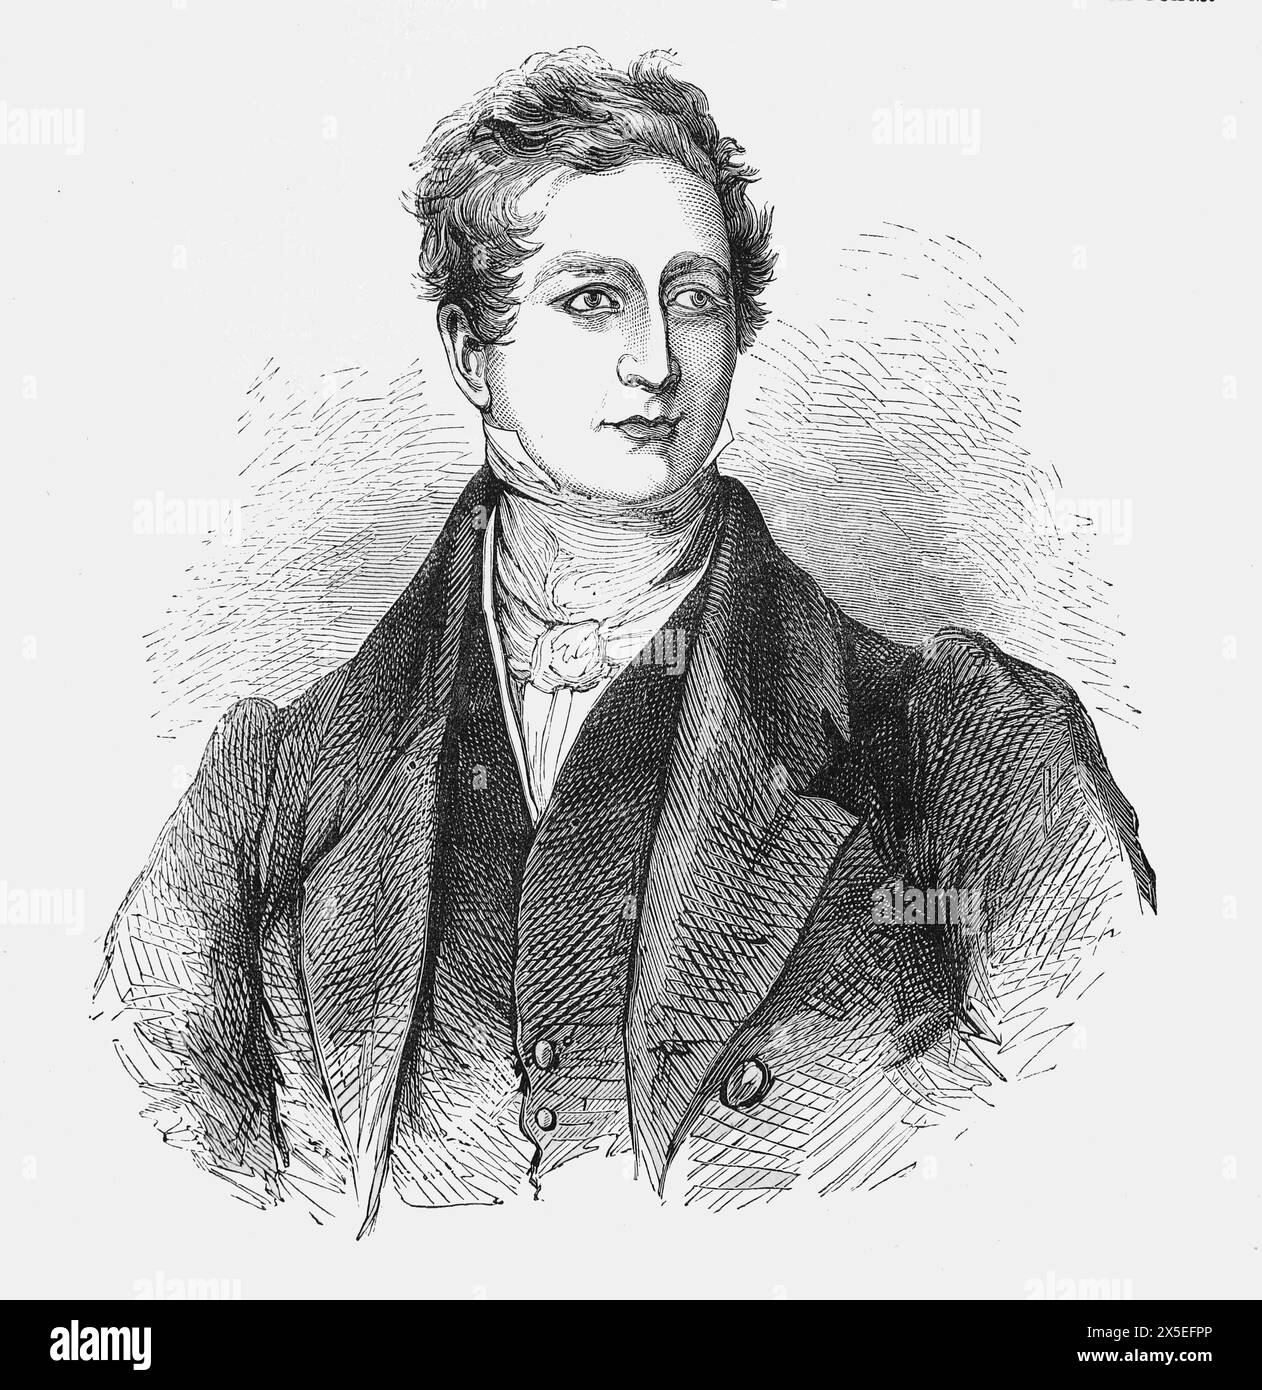 Portrait of Sir Robert Peel, British politician who served two terms as Prime Minister of the United KIngdom. Founder of the Metropolitan Police Service. Illustration from Cassell's History of England, Vol VII. New Edition published Circ 1873-5. Stock Photo